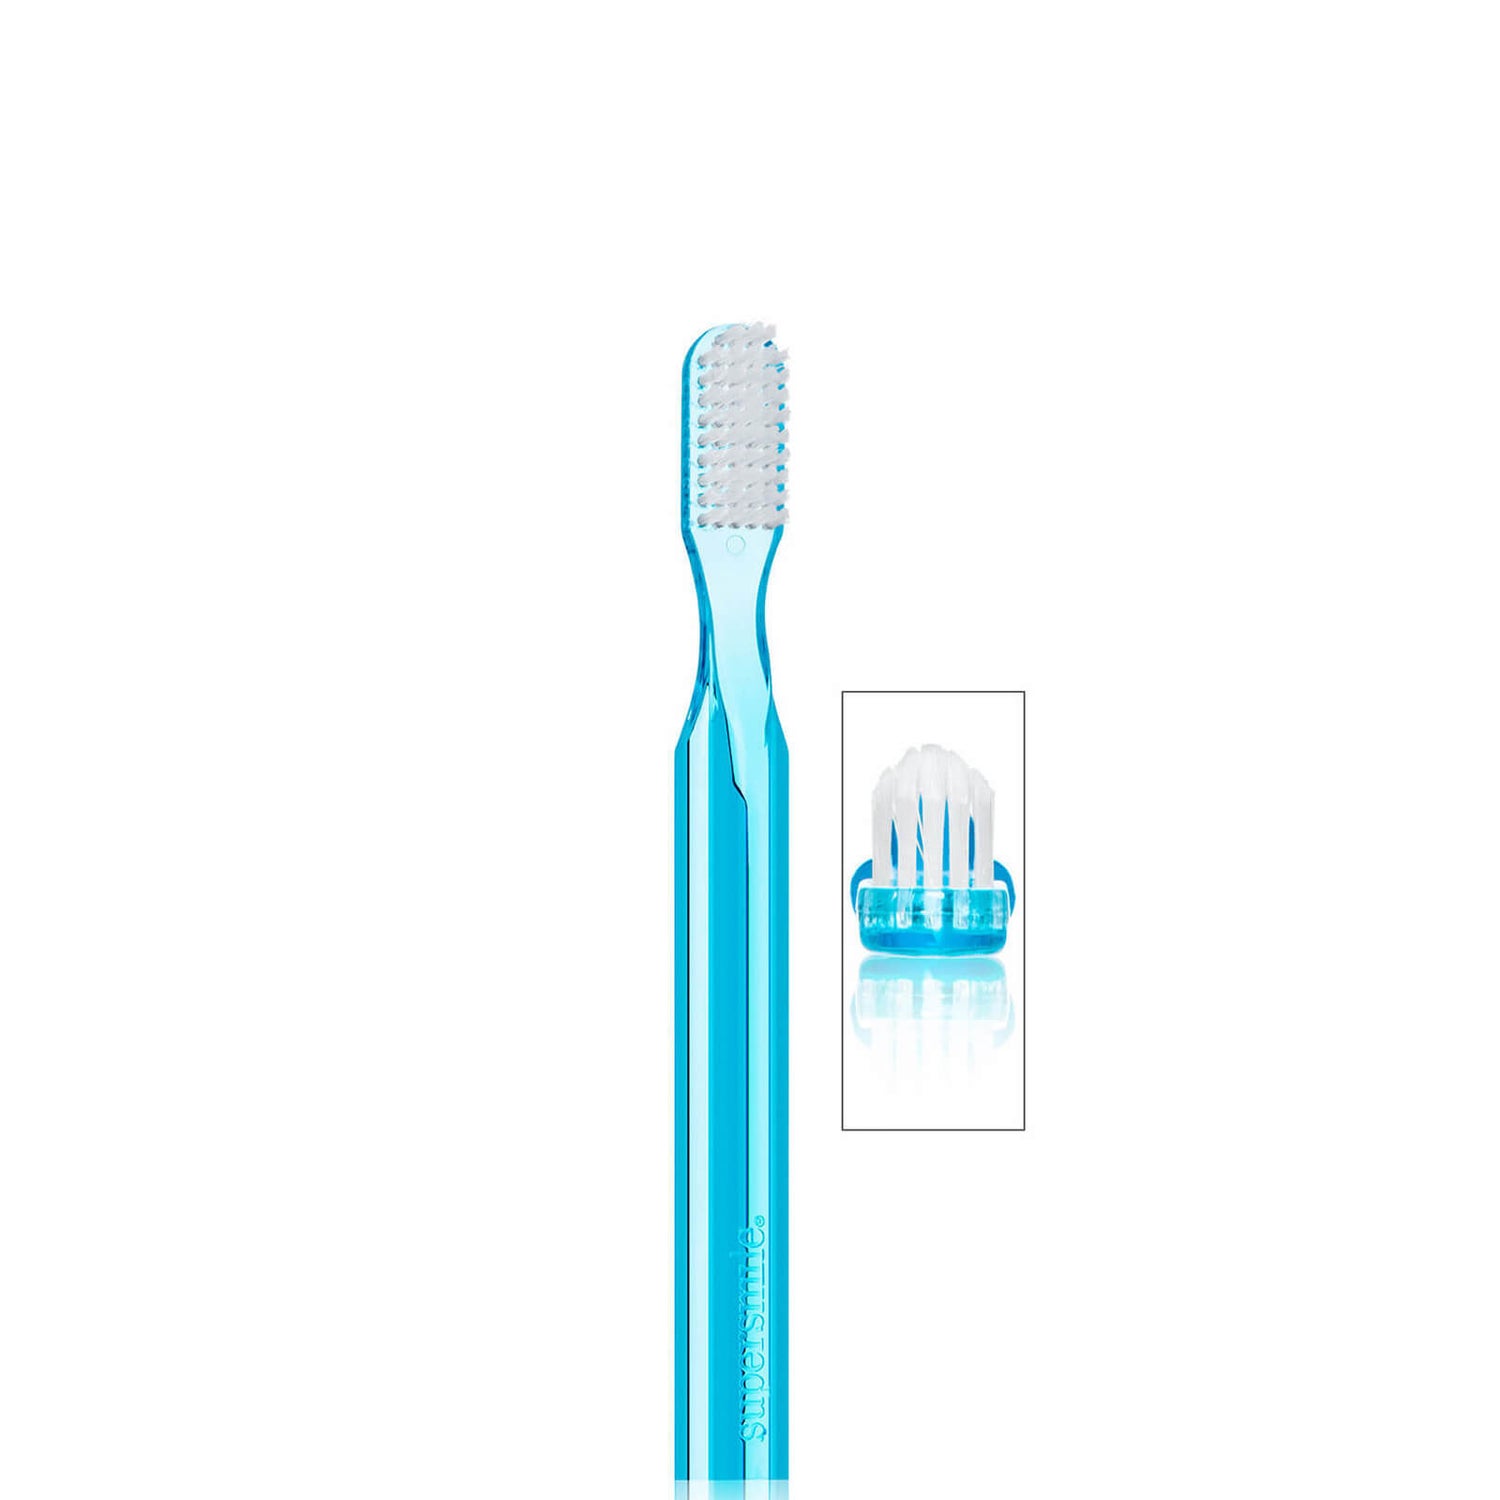 Supersmile 45 Degree Angled Toothbrush (1 piece)